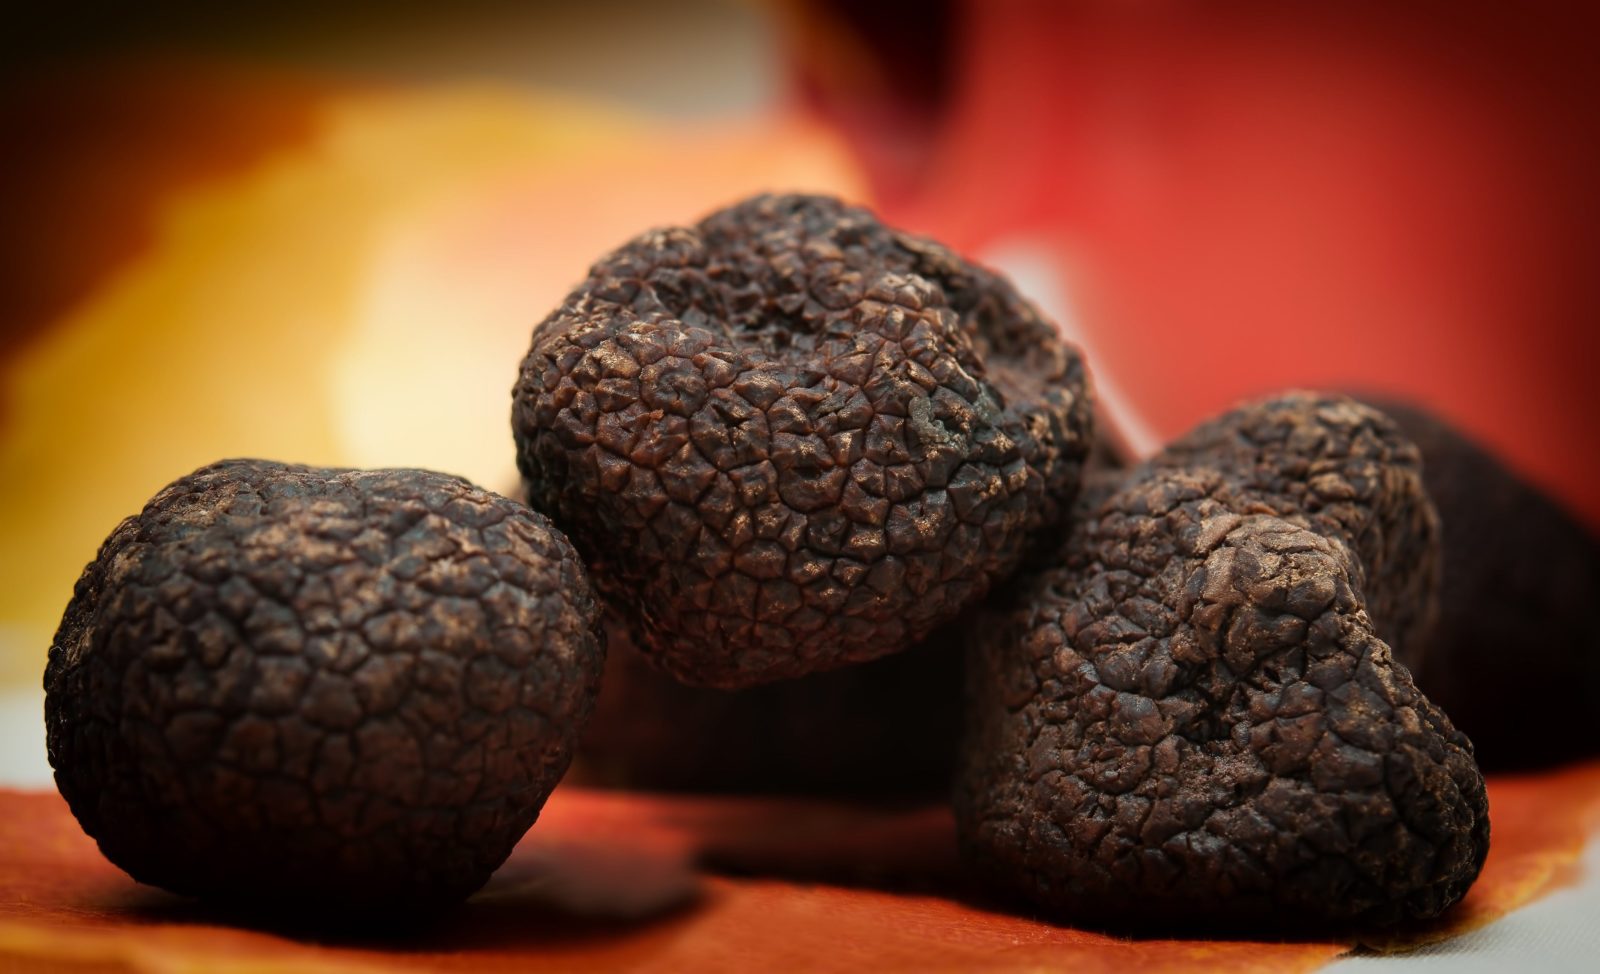 A group of black truffle on a red background